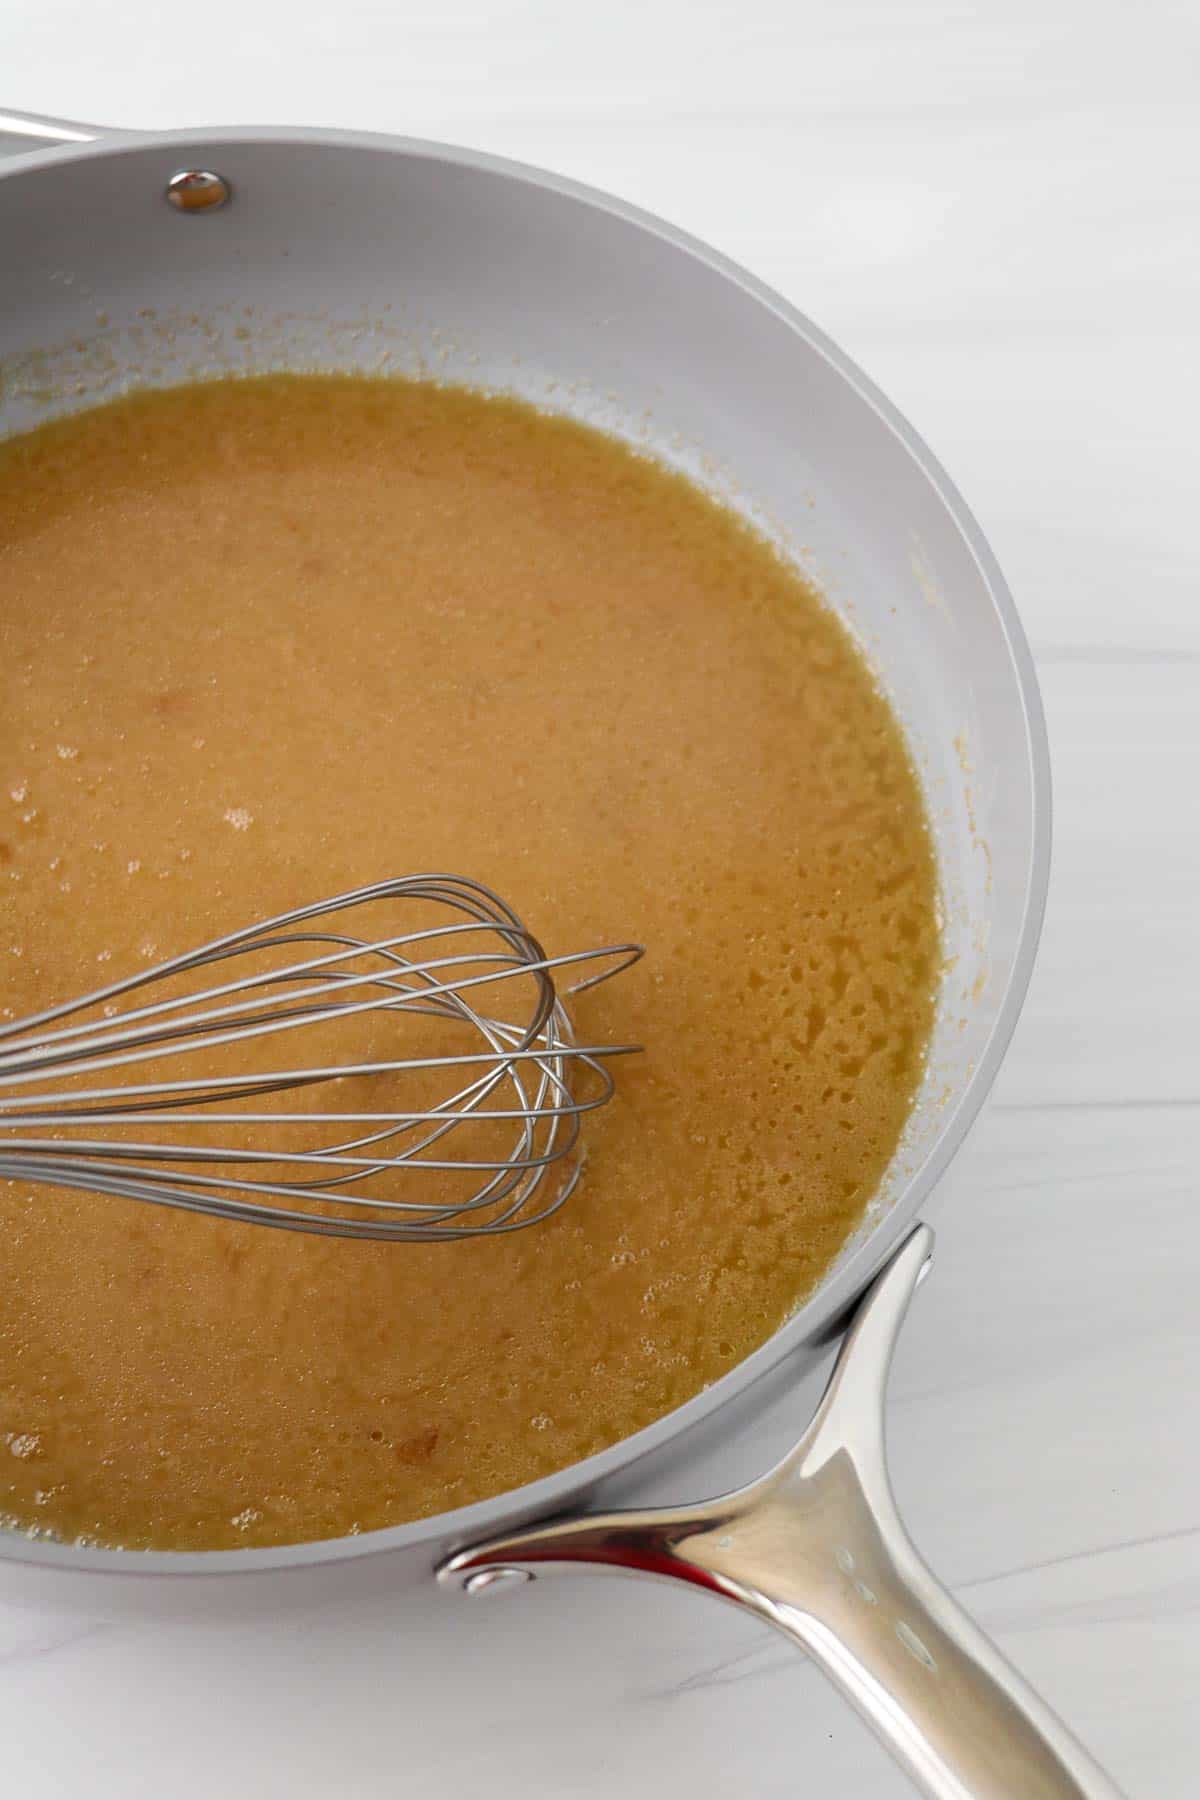 Broth in a gray pan with a whisk.